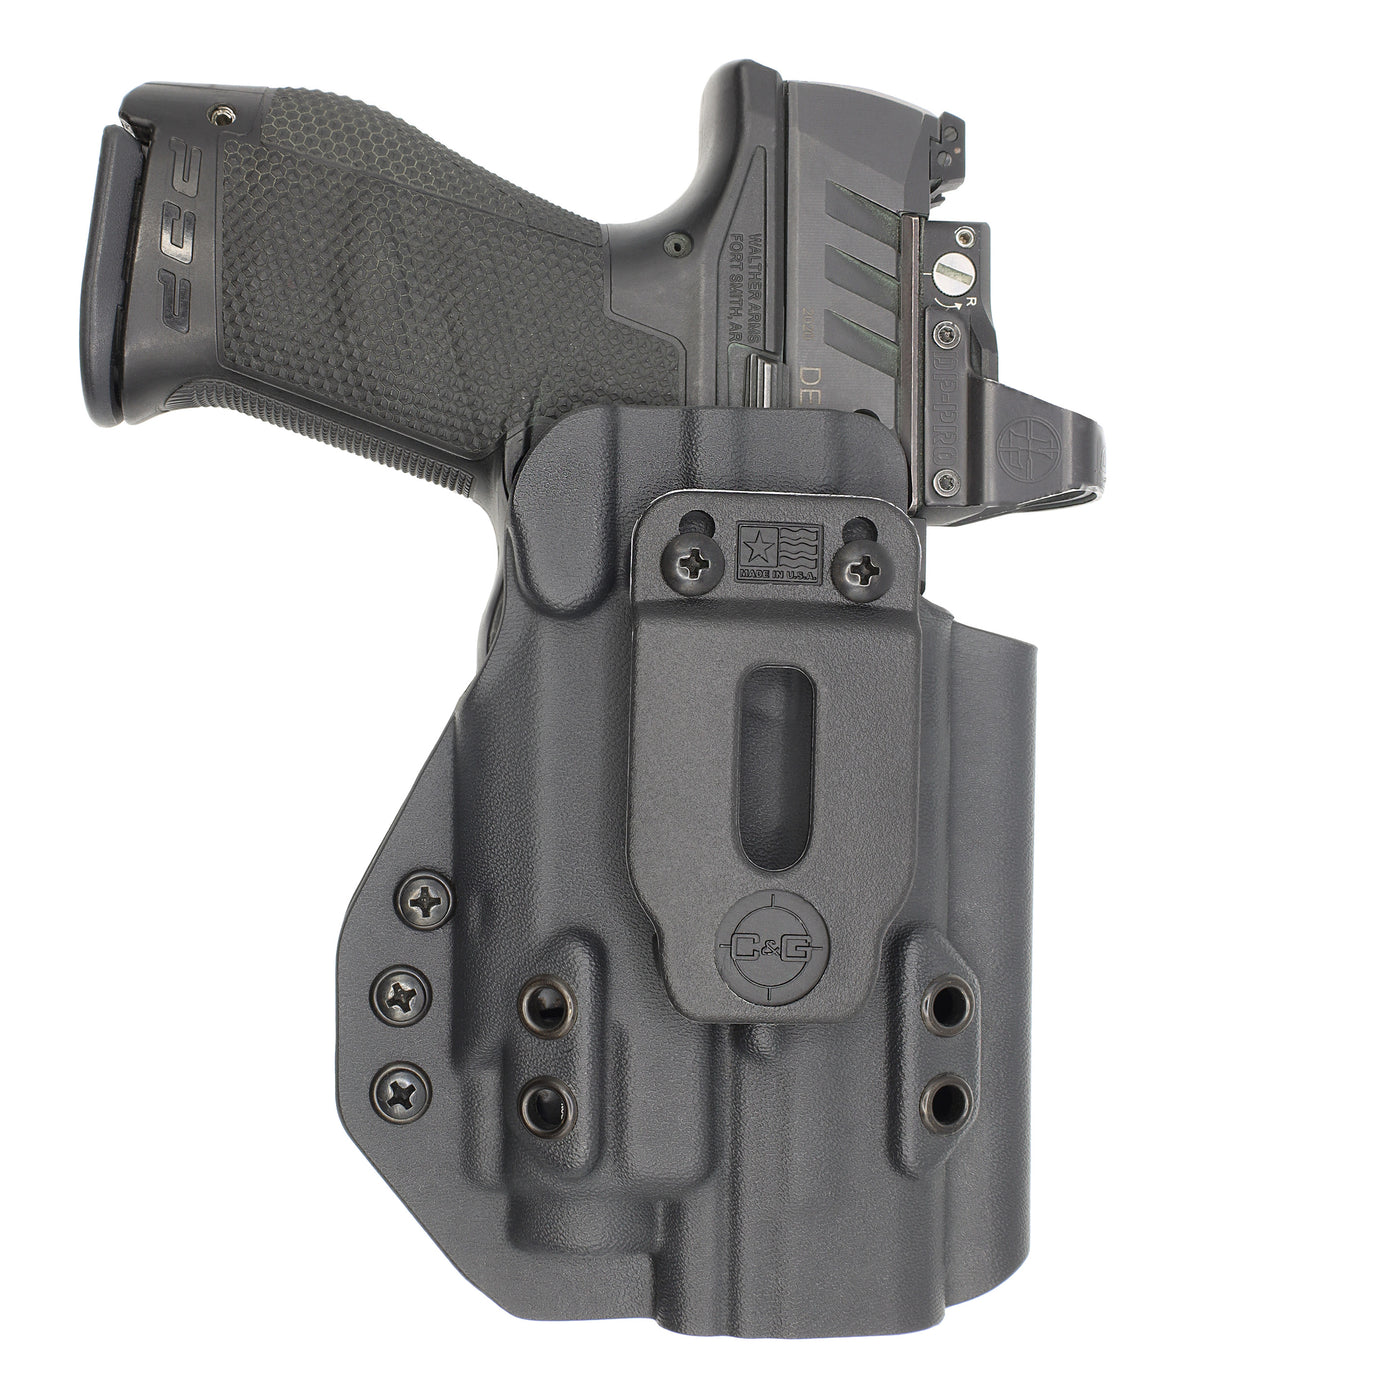 C&G Holsters custom IWB tactical CZ P07/09 streamlight TLR8 holstered